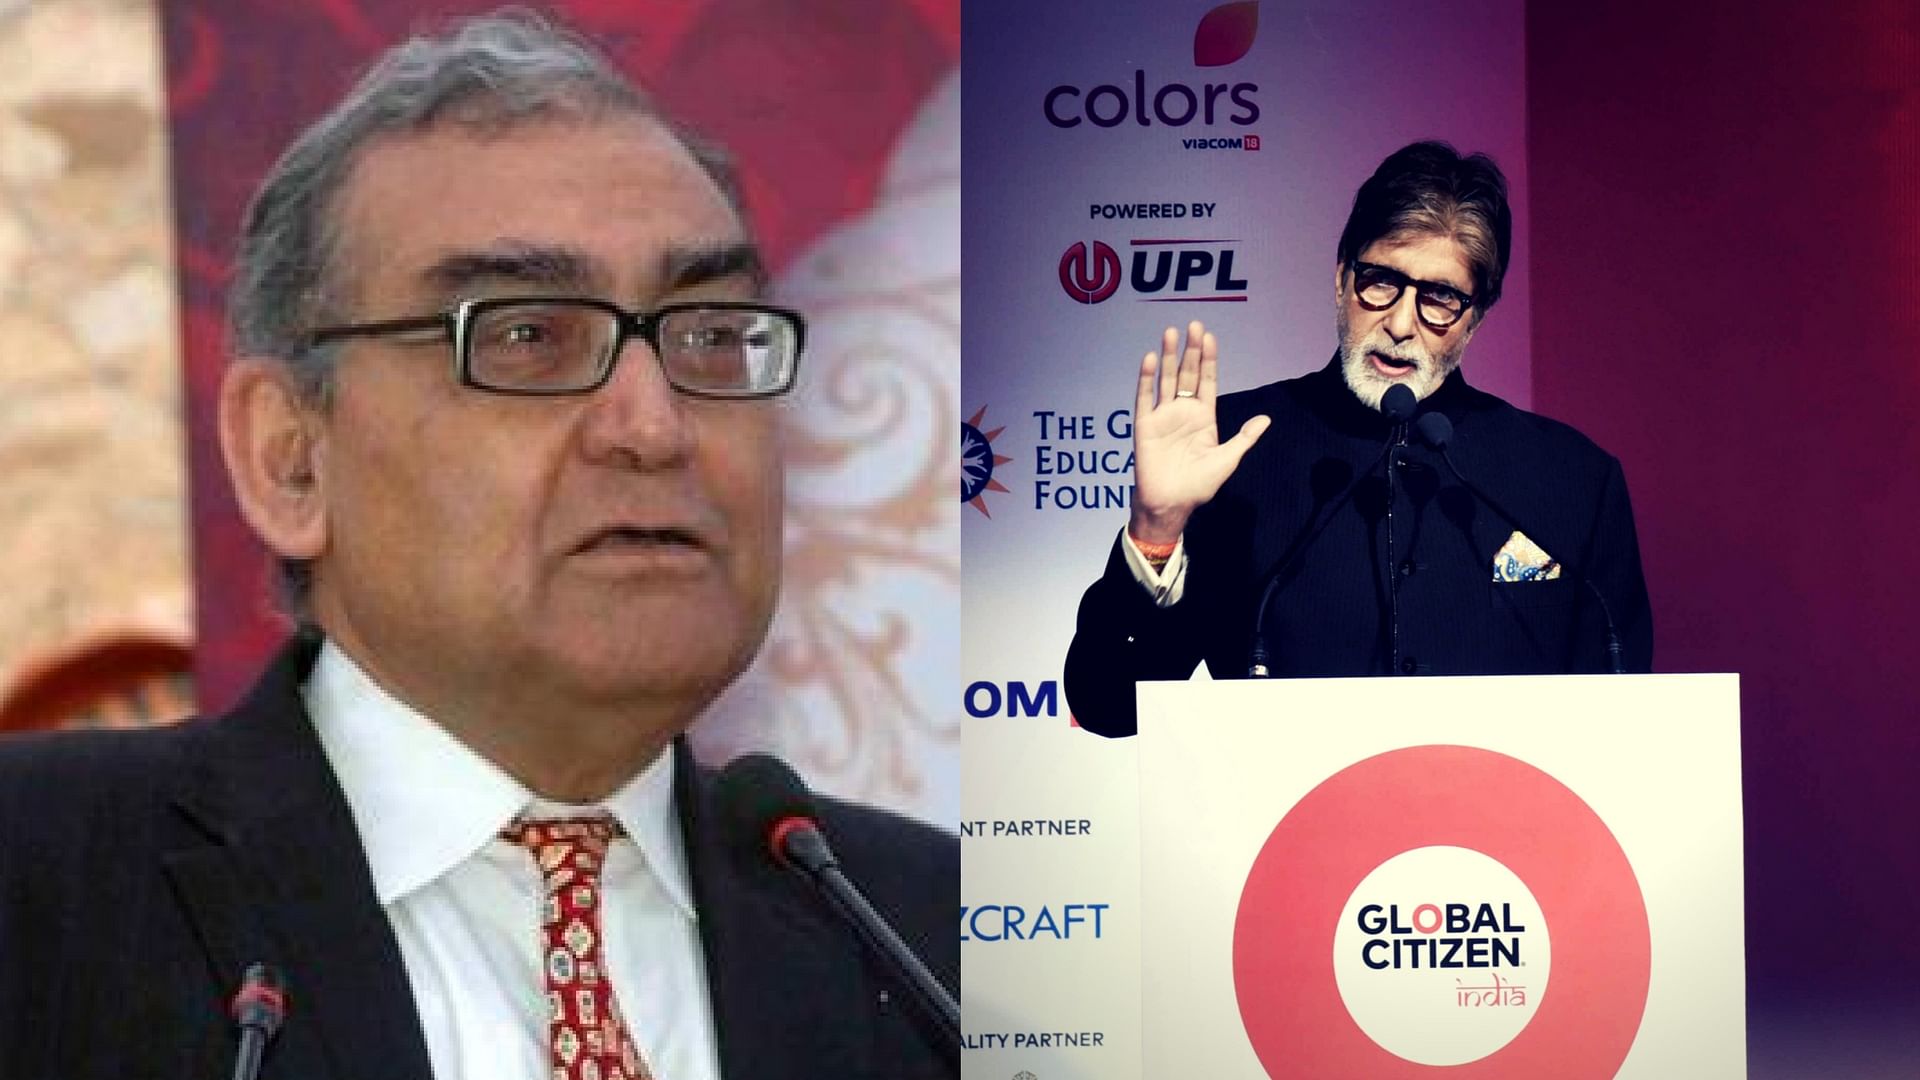 Katju has questioned Amitabh Bachchan’s contribution to the society in his recent Facebook post. (Photo Courtesy: Twitter/ <a href="https://twitter.com/mkatju">@mkatju</a>/ Facebook/ <a href="https://www.facebook.com/glblctznIN/">@glblctznIN</a>)